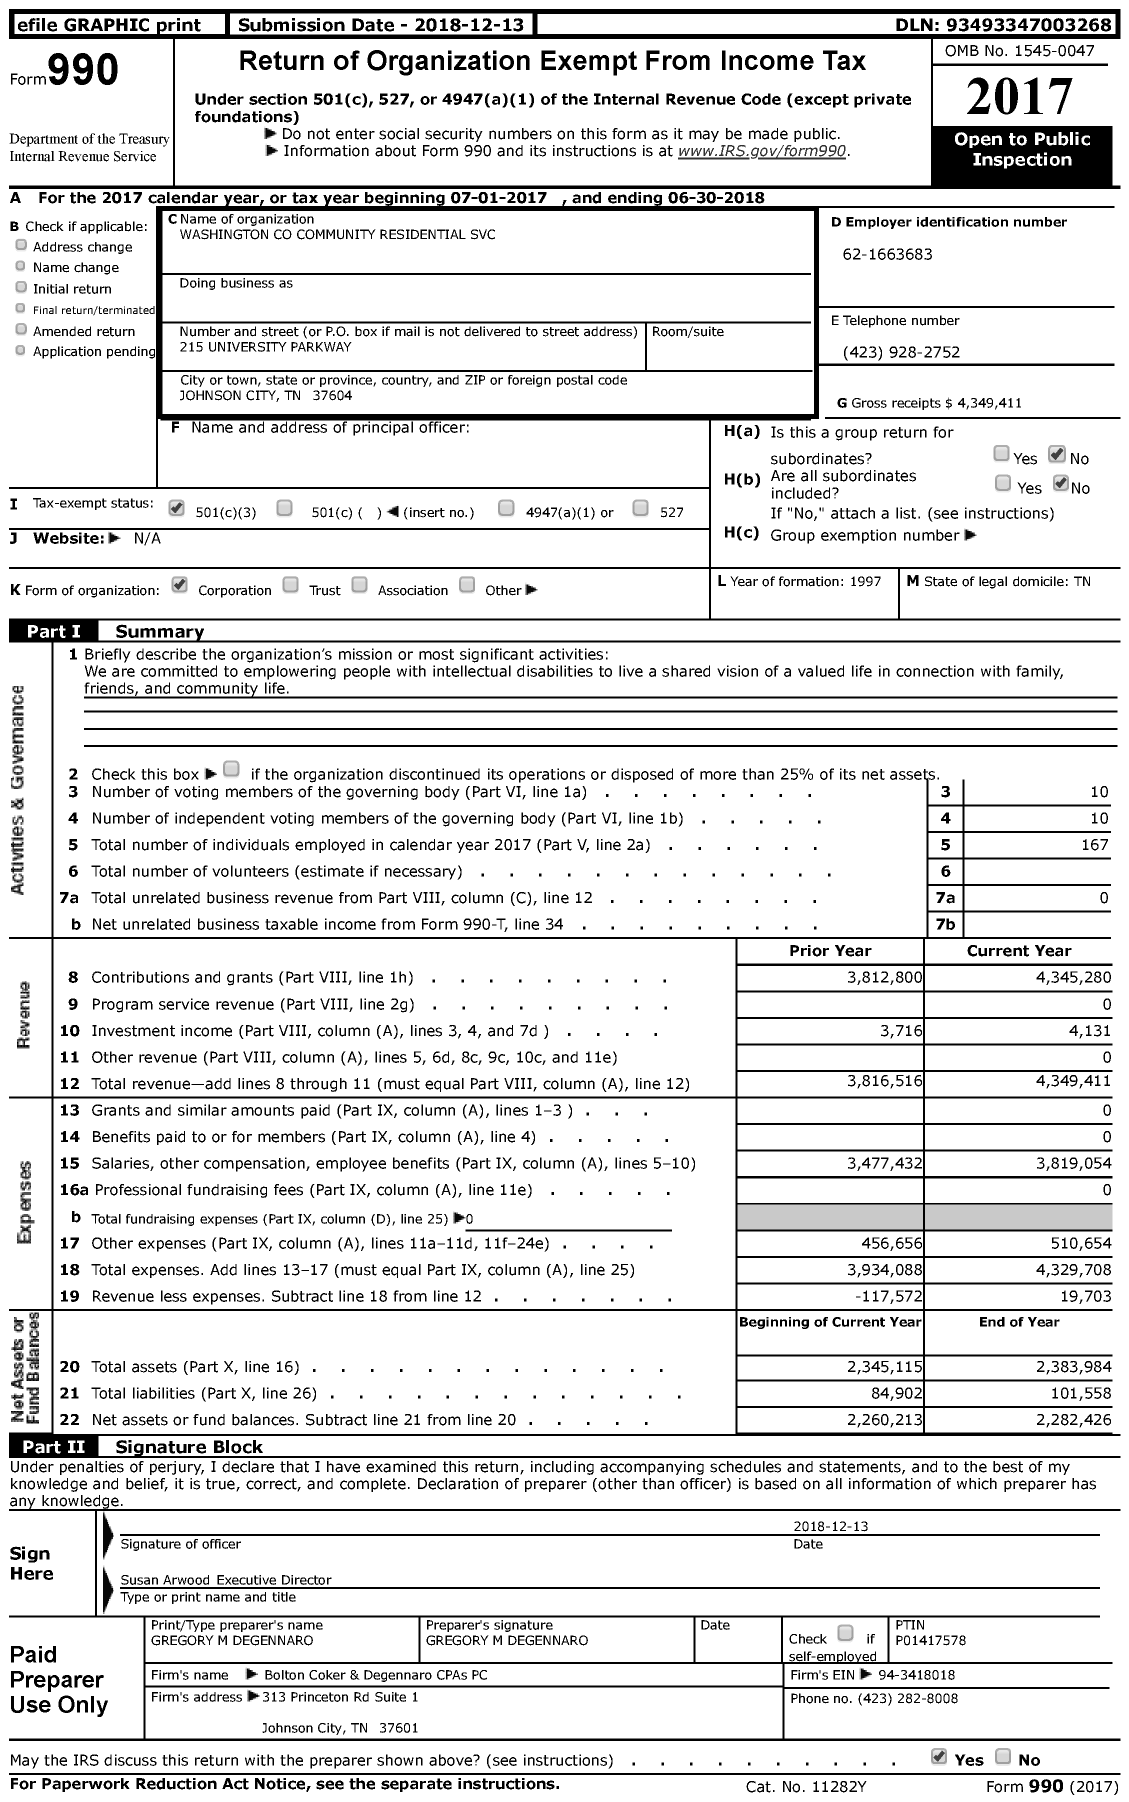 Image of first page of 2017 Form 990 for Washington Community Residential SVCS